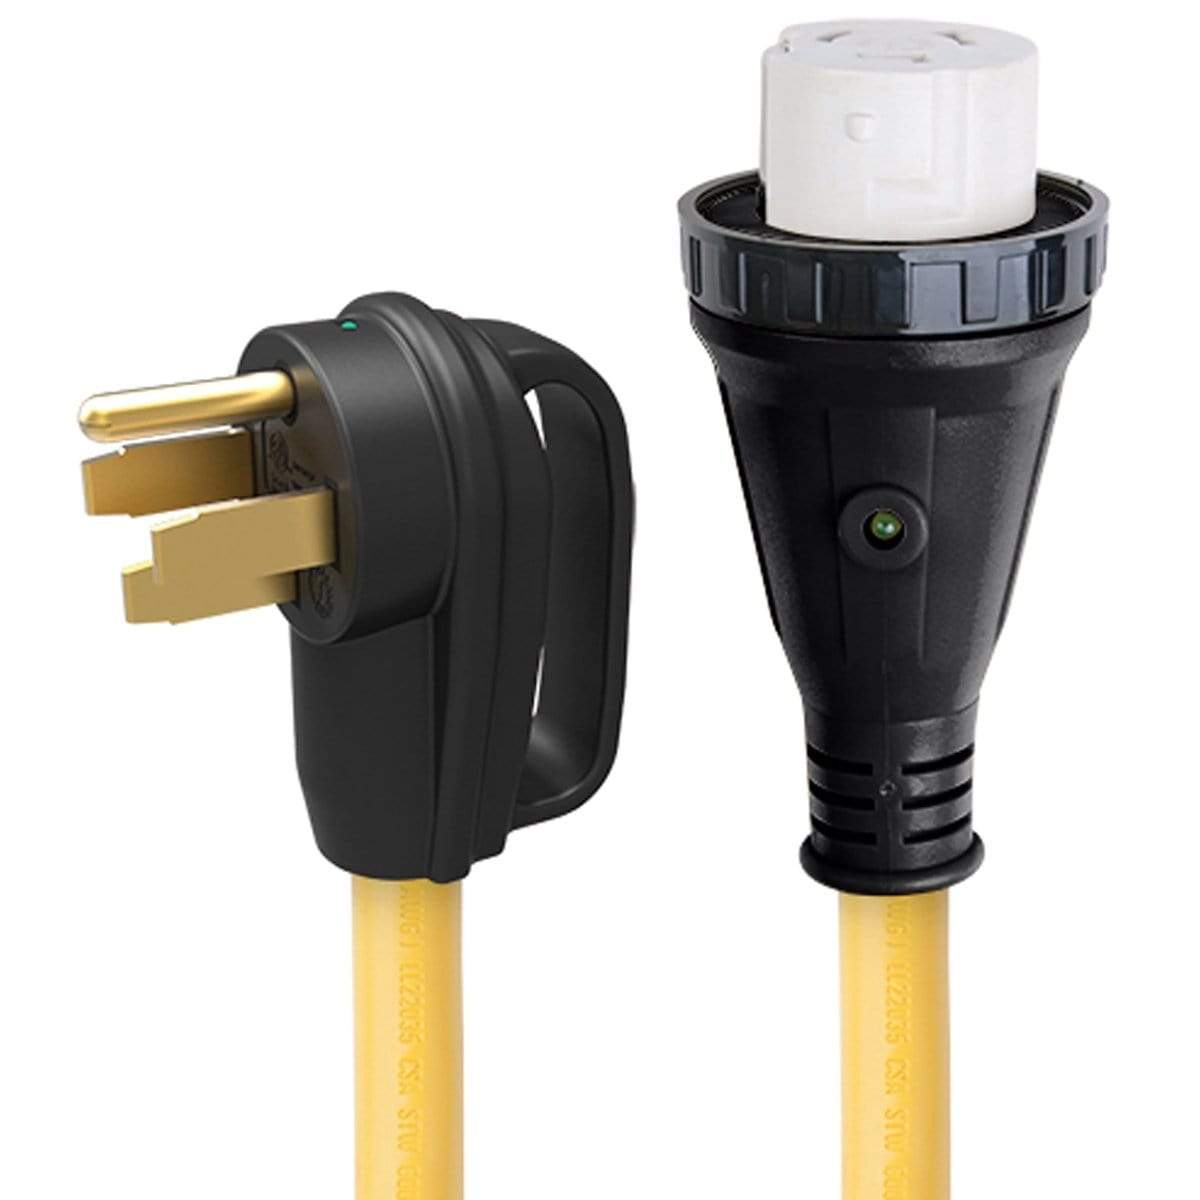 ParkPower Qualifies for Free Shipping ParkPower Weekender Detachable Power Cord 36' 50a #50ARVD30